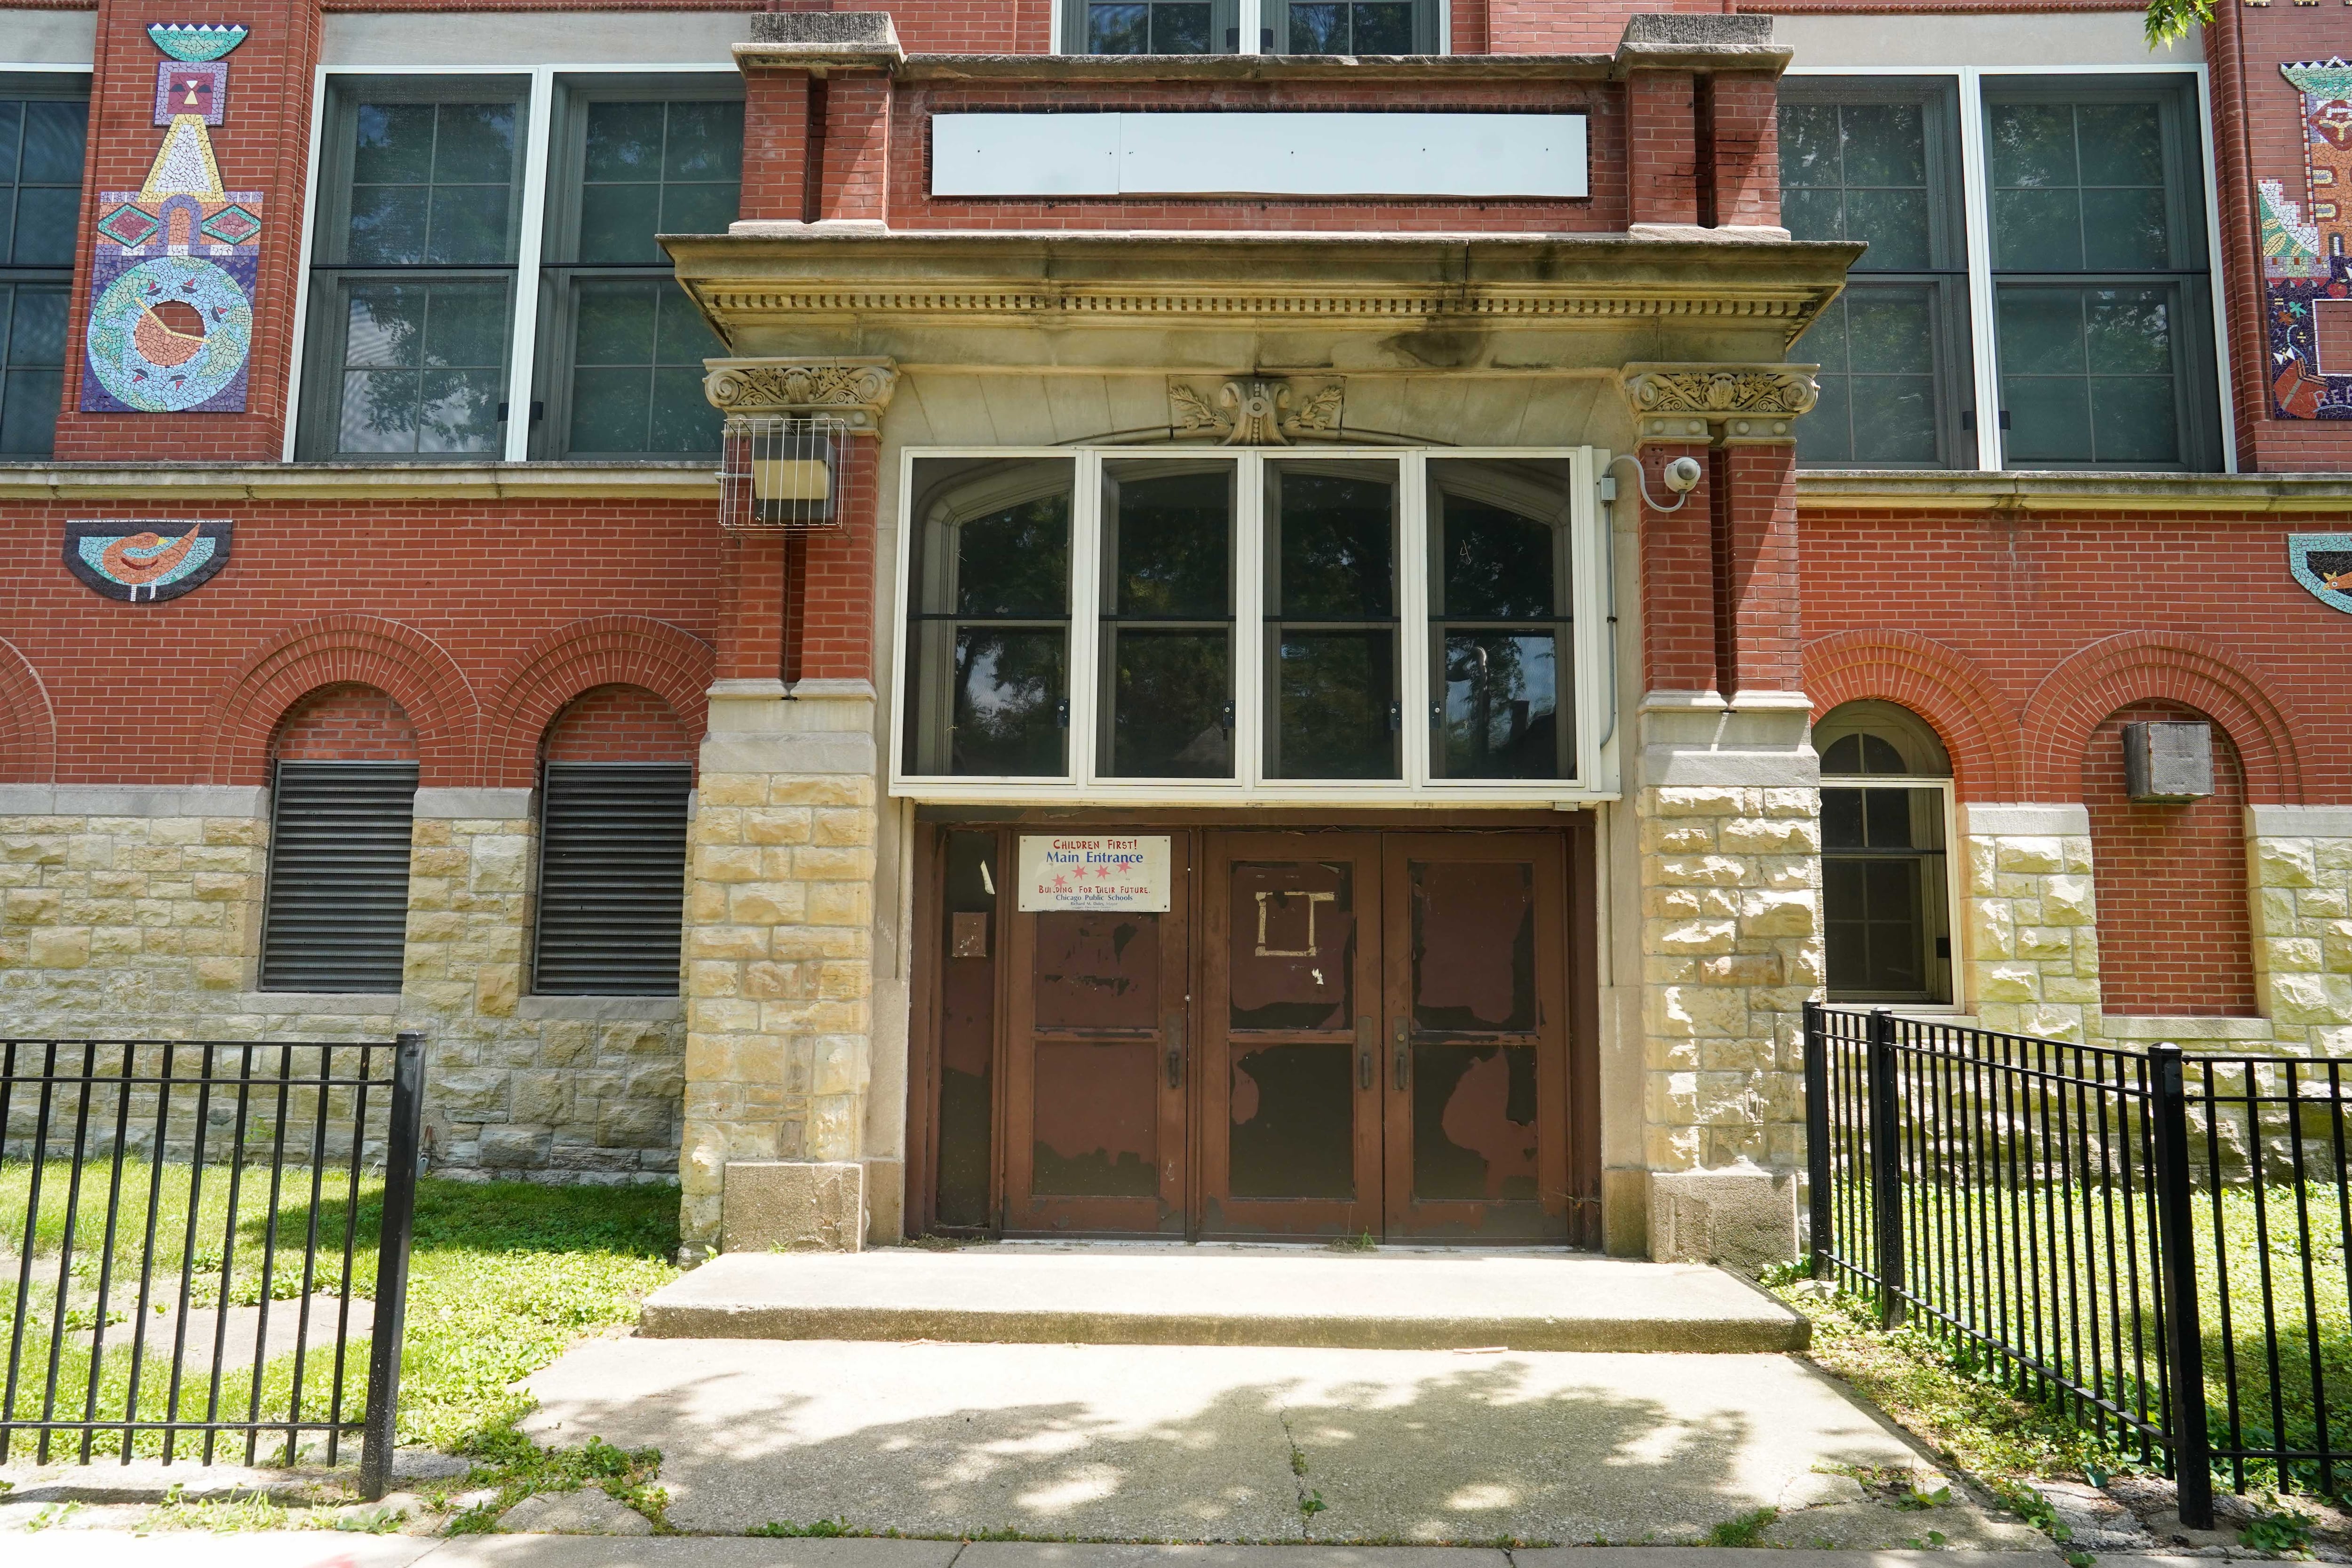 The front entrance of a closed school made of large stone and a wooden door. There are several large windows and a green lawn with a black fence in the foreground.